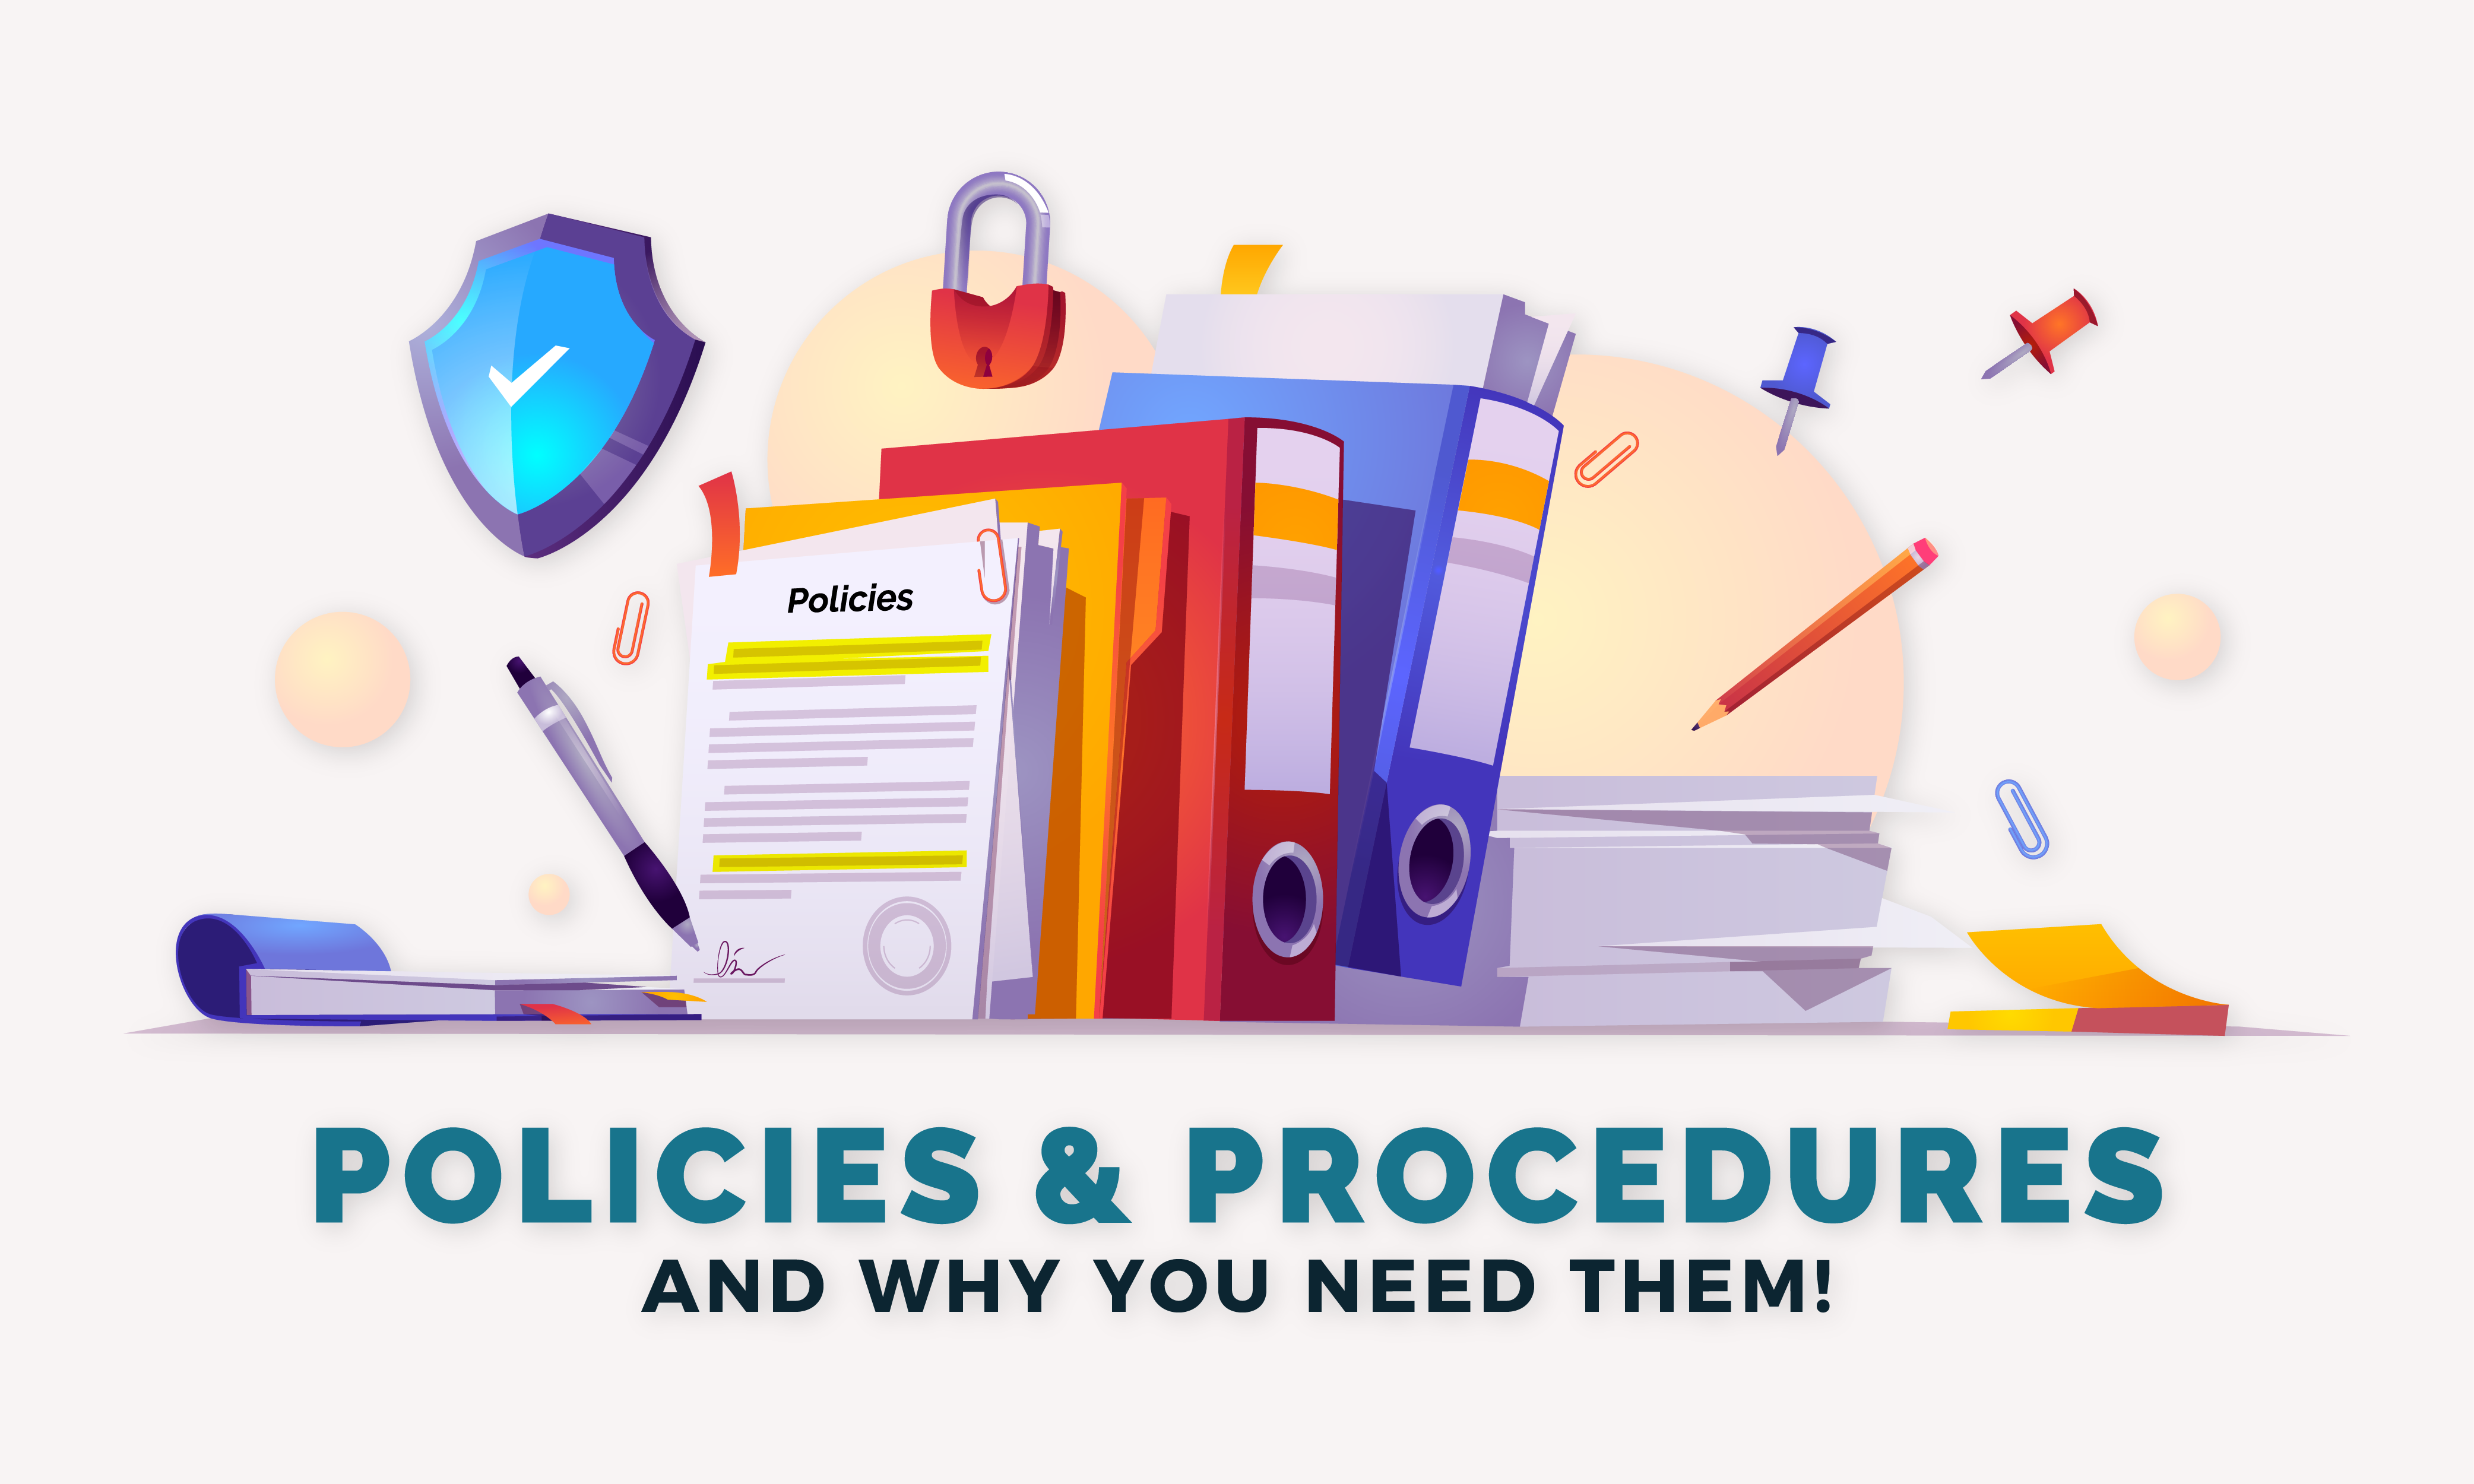 Policy & Procedure Components You Need For Your Organization’s Success